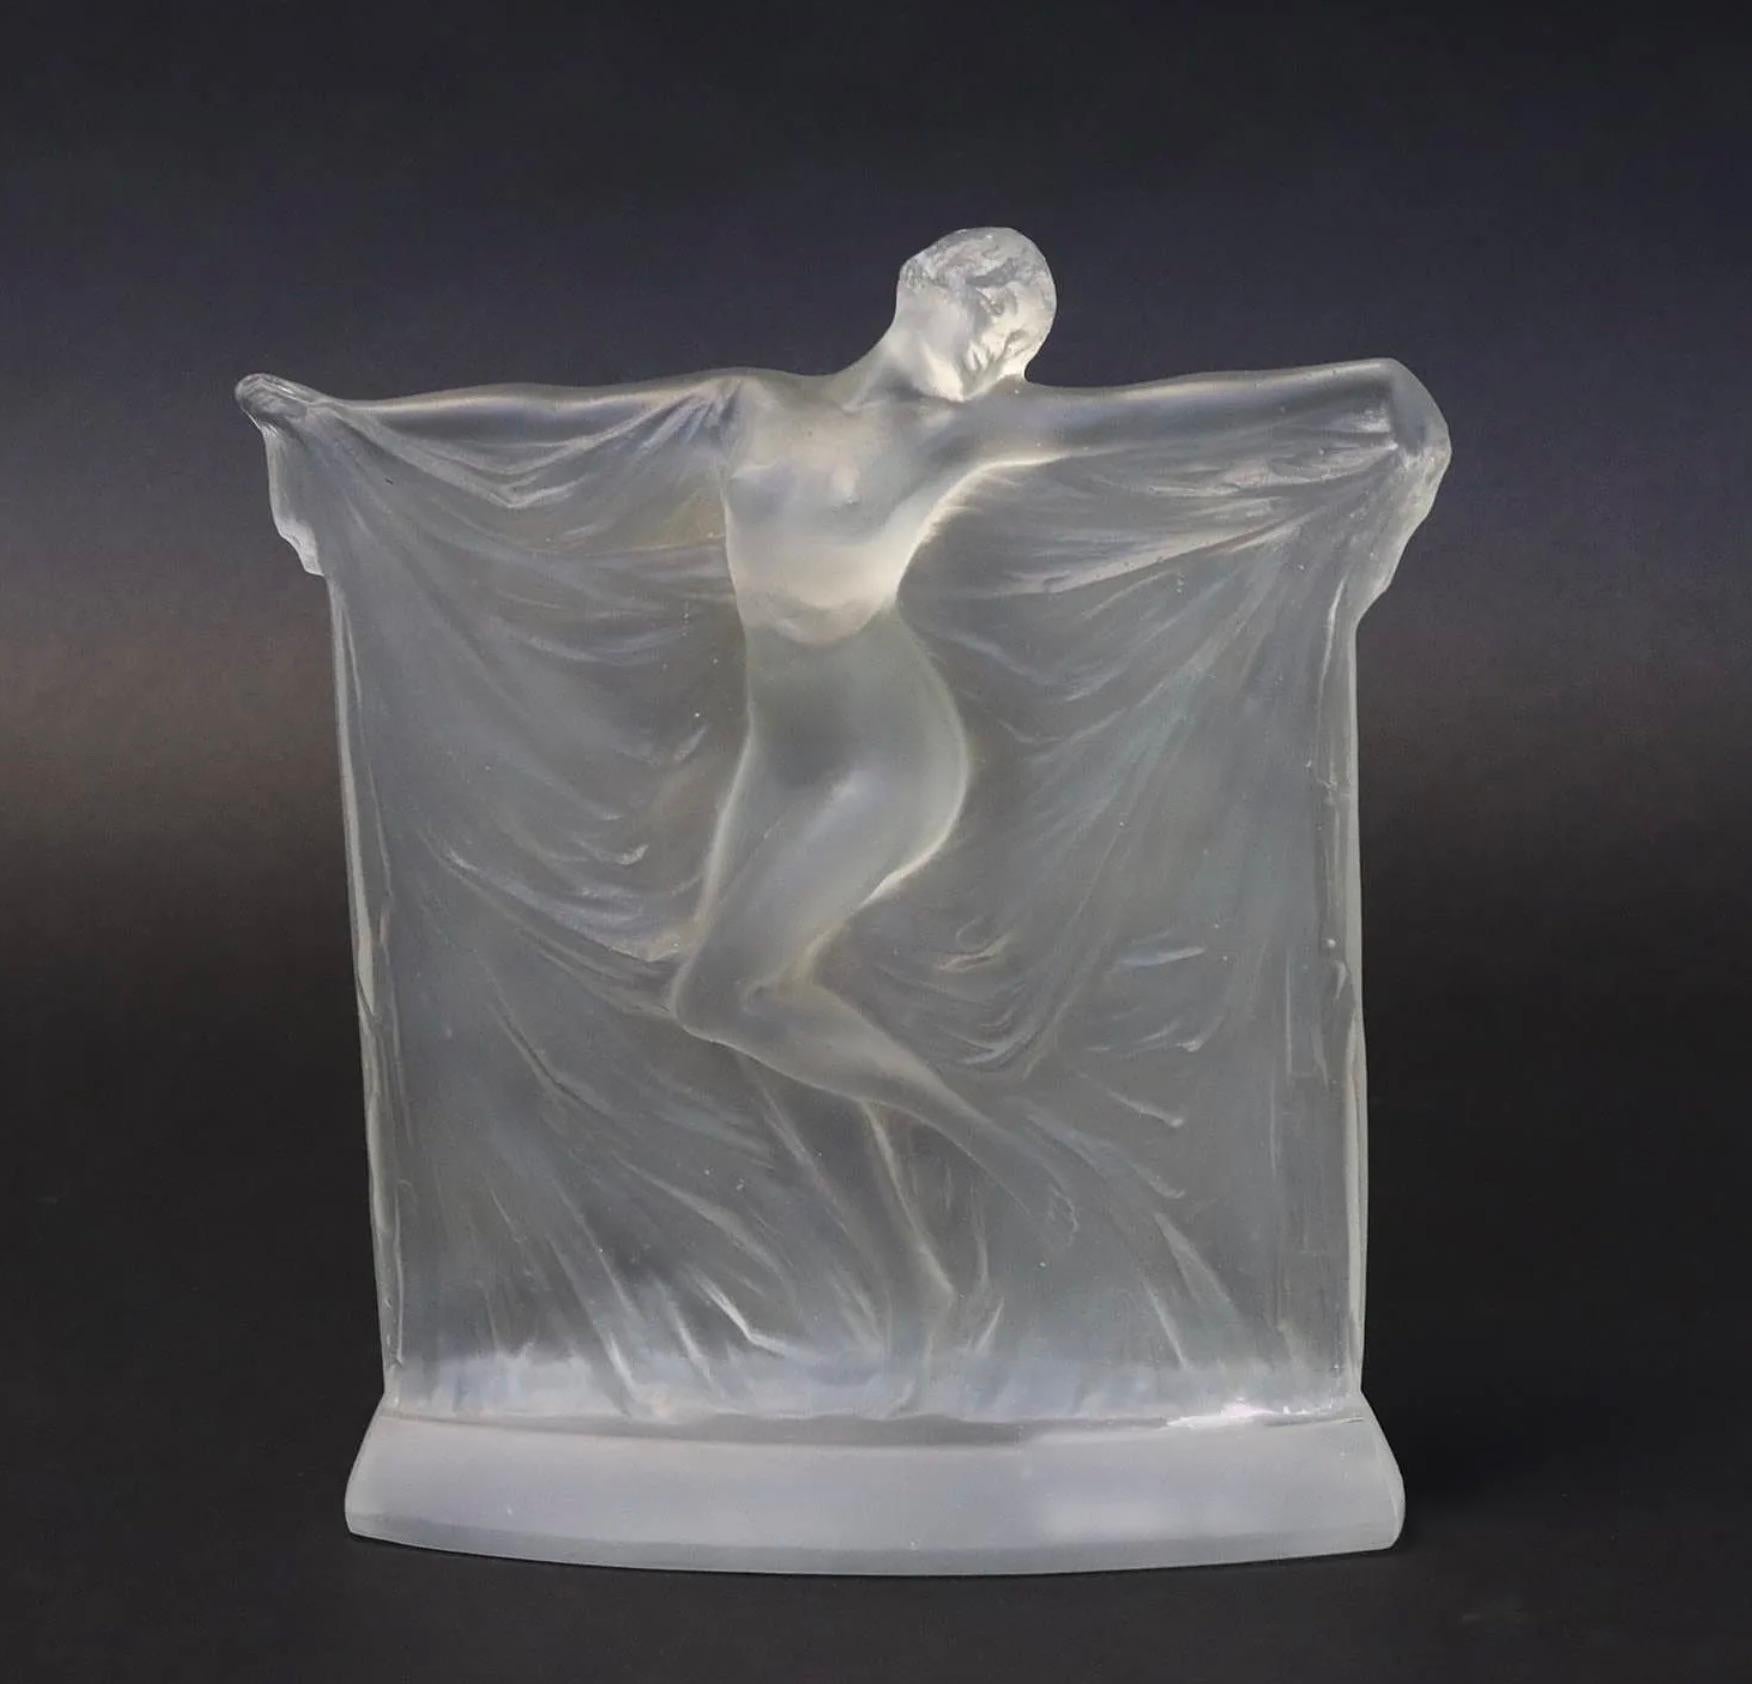 Lalique statue Thais: Frosted glass 22 cm tall voluptuous posed nude with arms draped female
Modèle reproduit in Félix Marcilhac, 